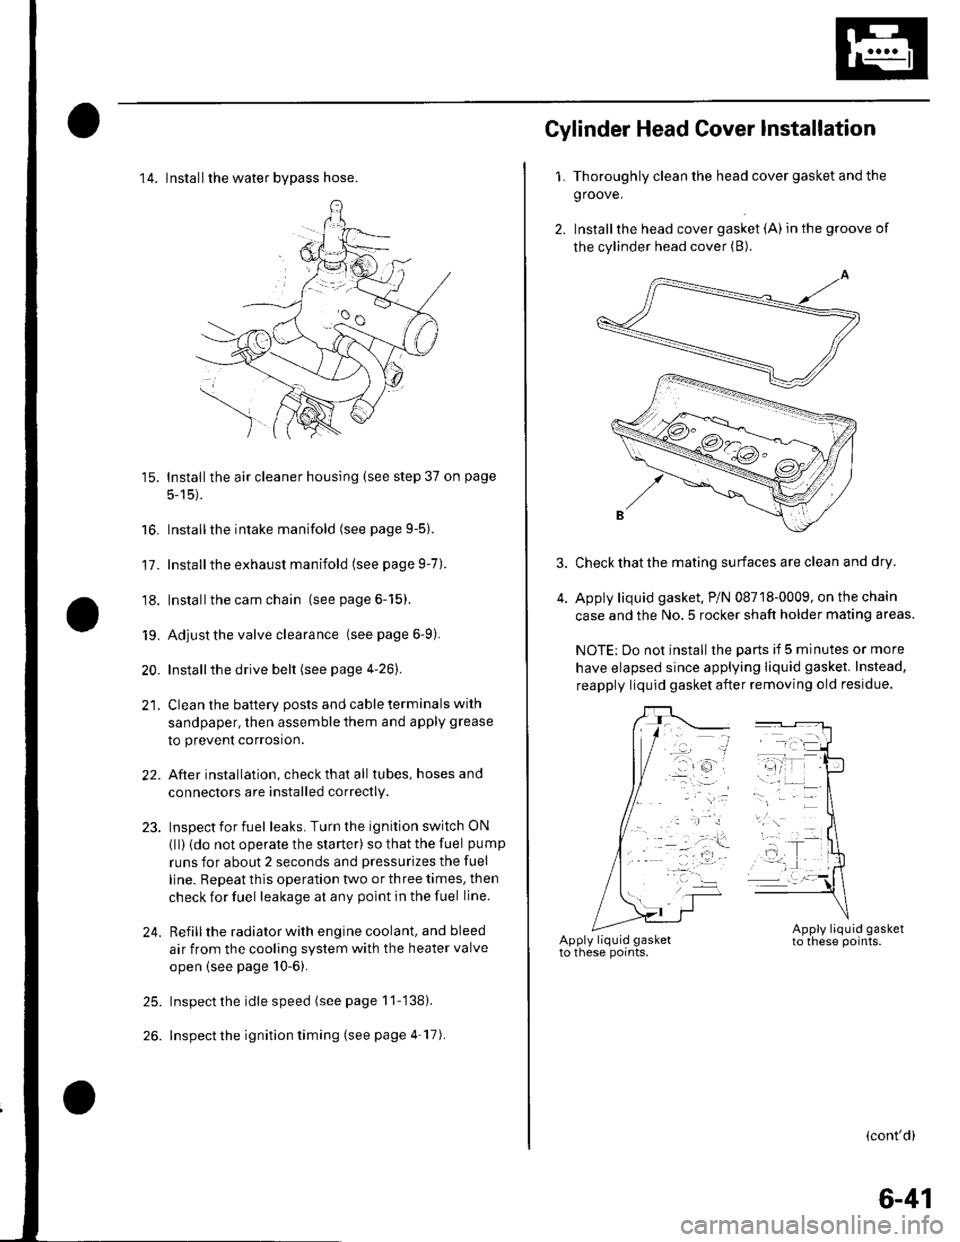 HONDA CIVIC 2002 7.G Workshop Manual 14. Installthe water bvpass hose.
15. Installthe air cleaner housing (see step 37 on page
5-15).
16. Installthe intake manifold (see page 9-5).
17. Installthe exhaust manifold (see page 9-7).
18. Ins